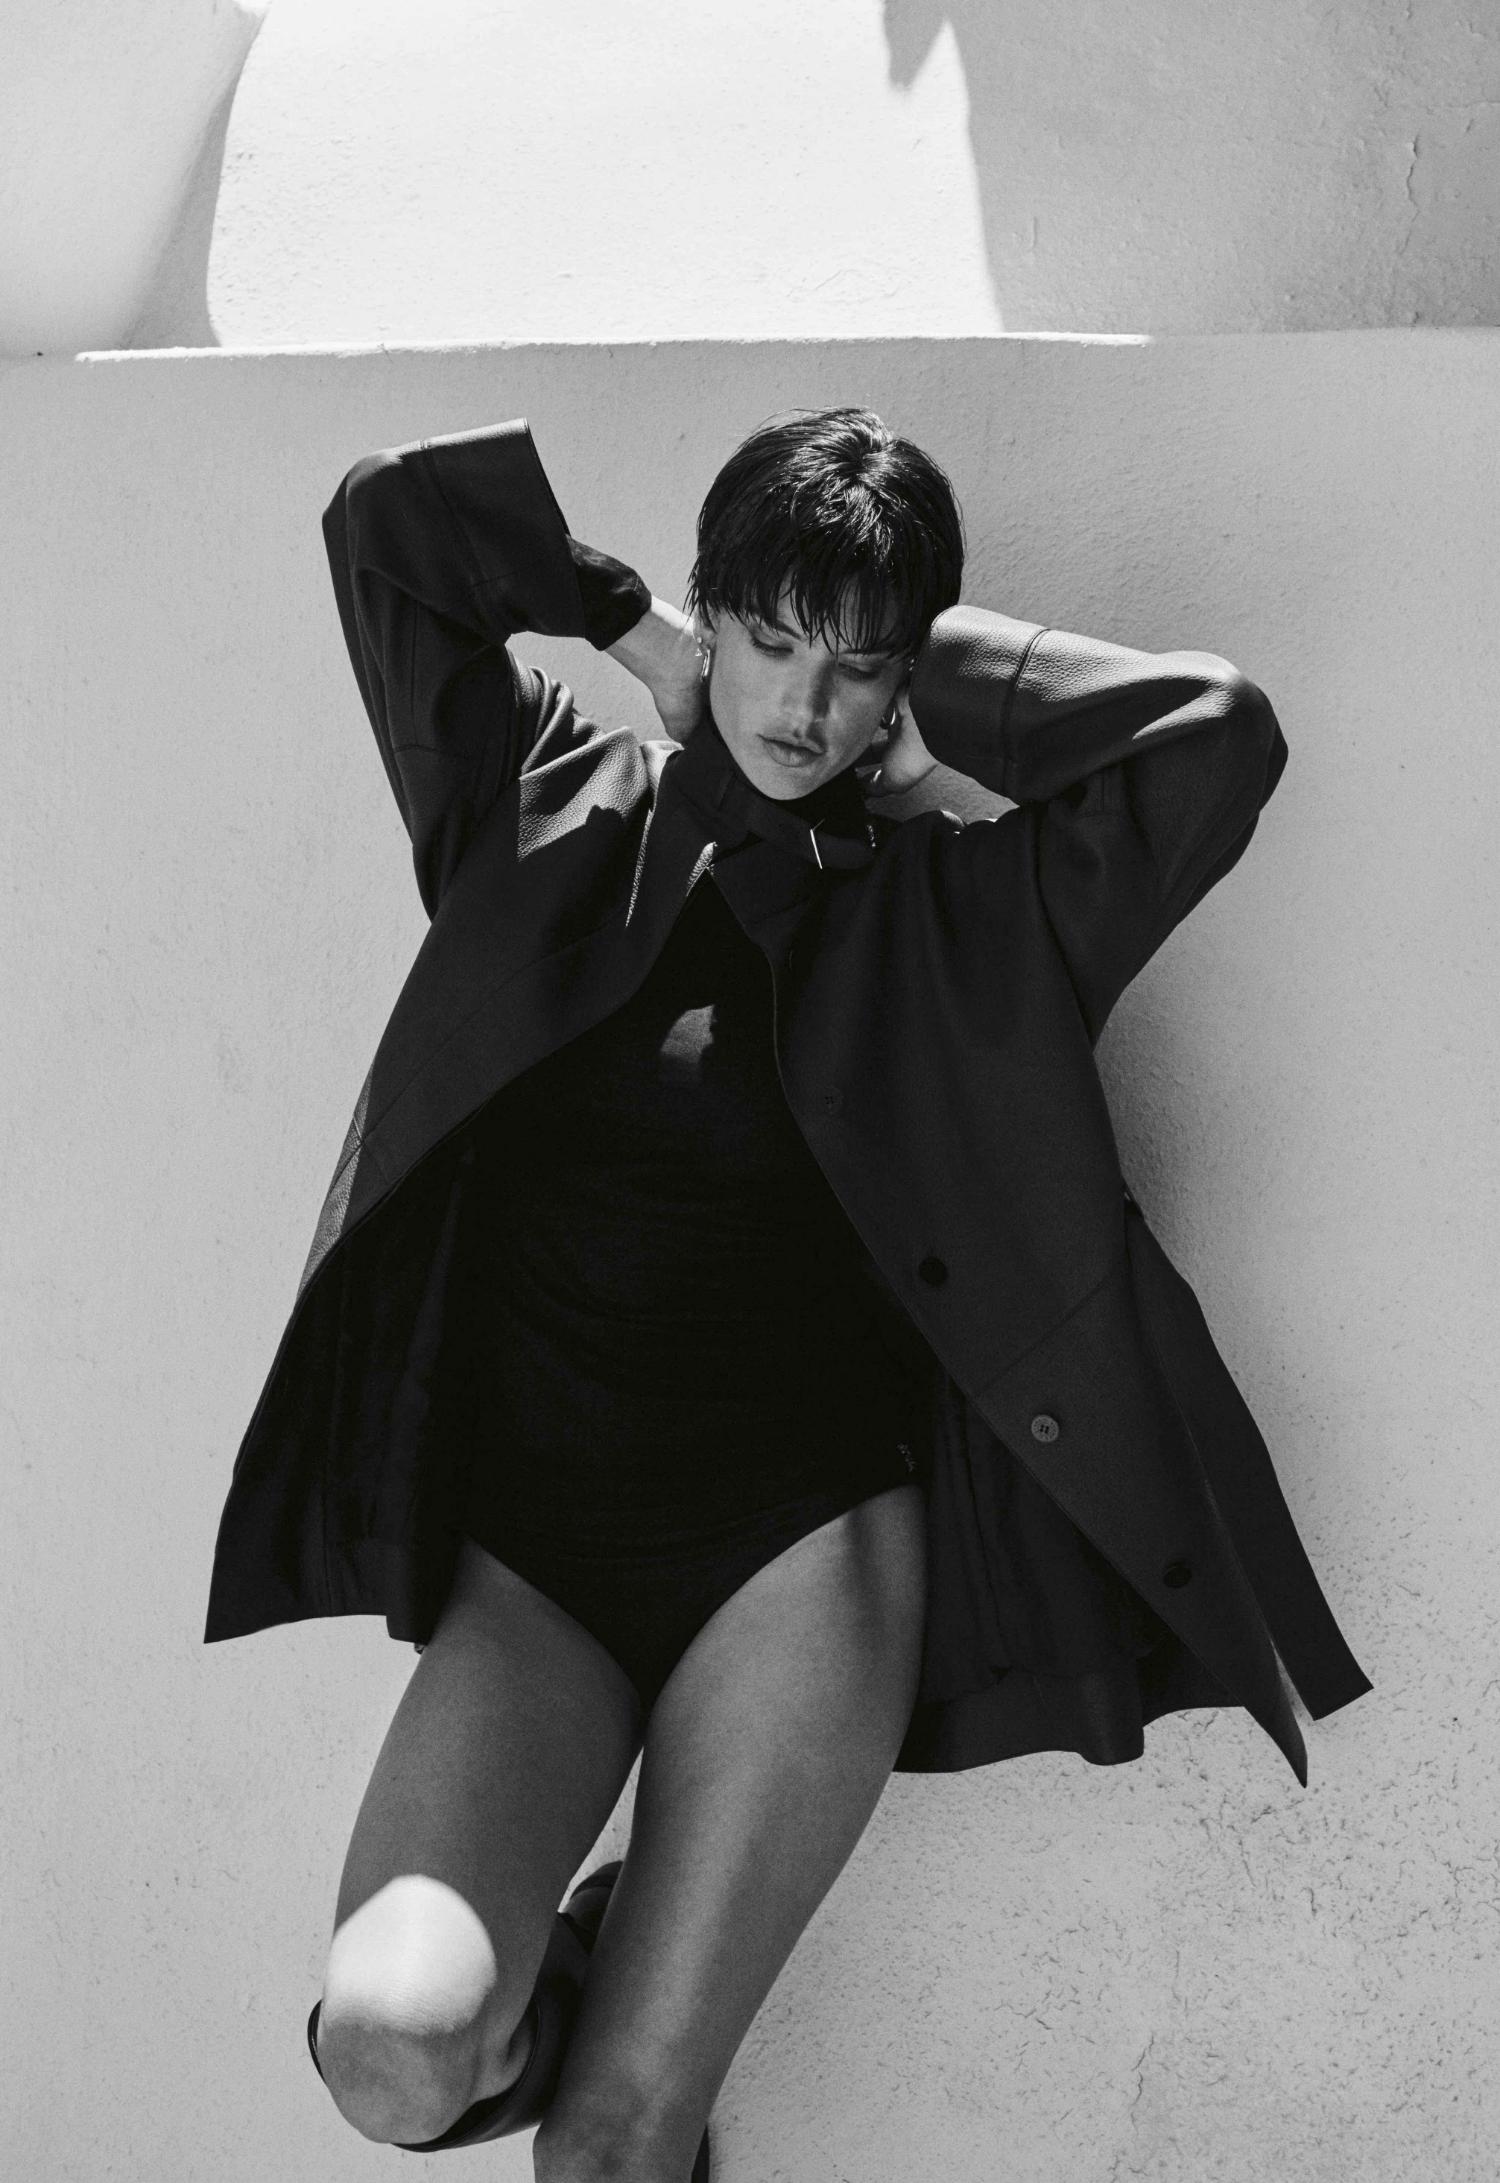 Alessandra Ambrosio by Sonia Szostak for Vogue Greece September 2019 Back to 90s Linda Evangelista Tribute